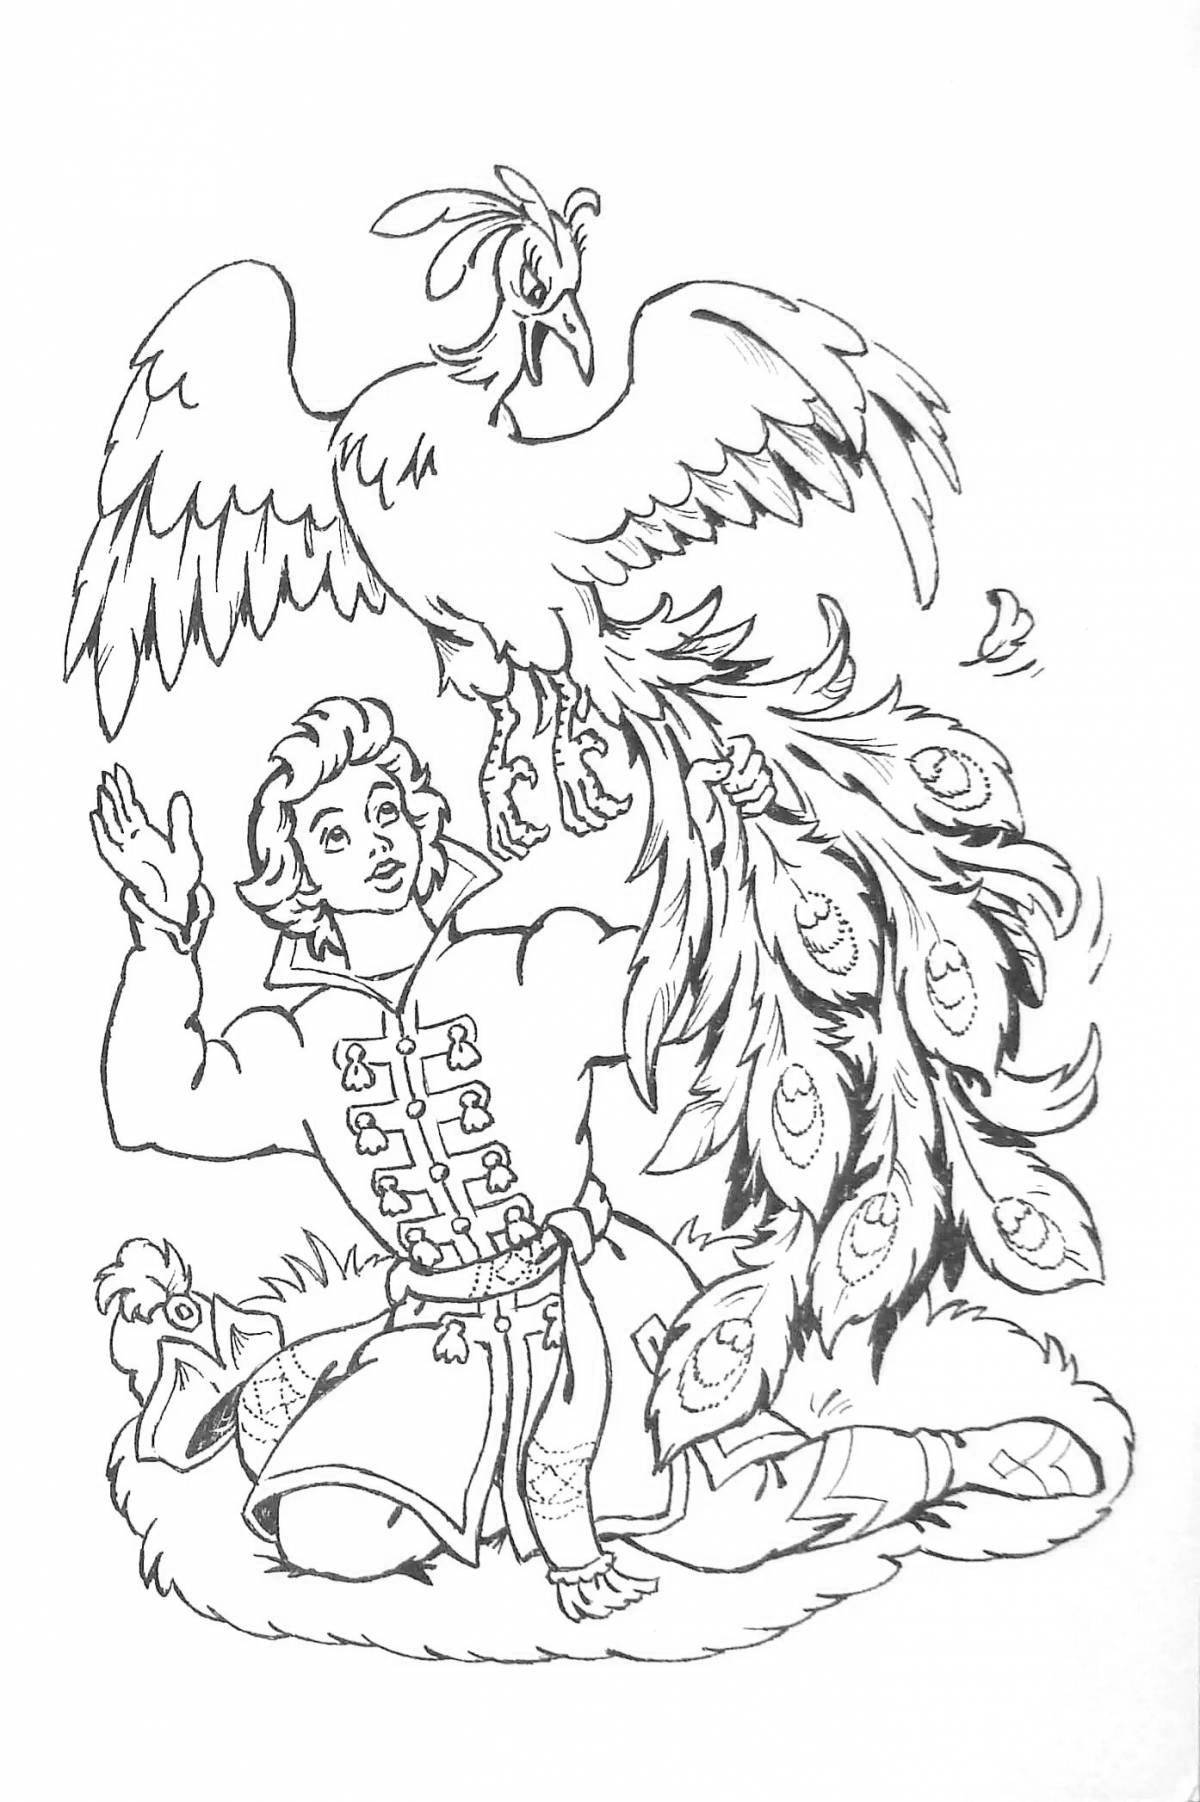 Fairytale coloring book based on Pushkin's fairy tales